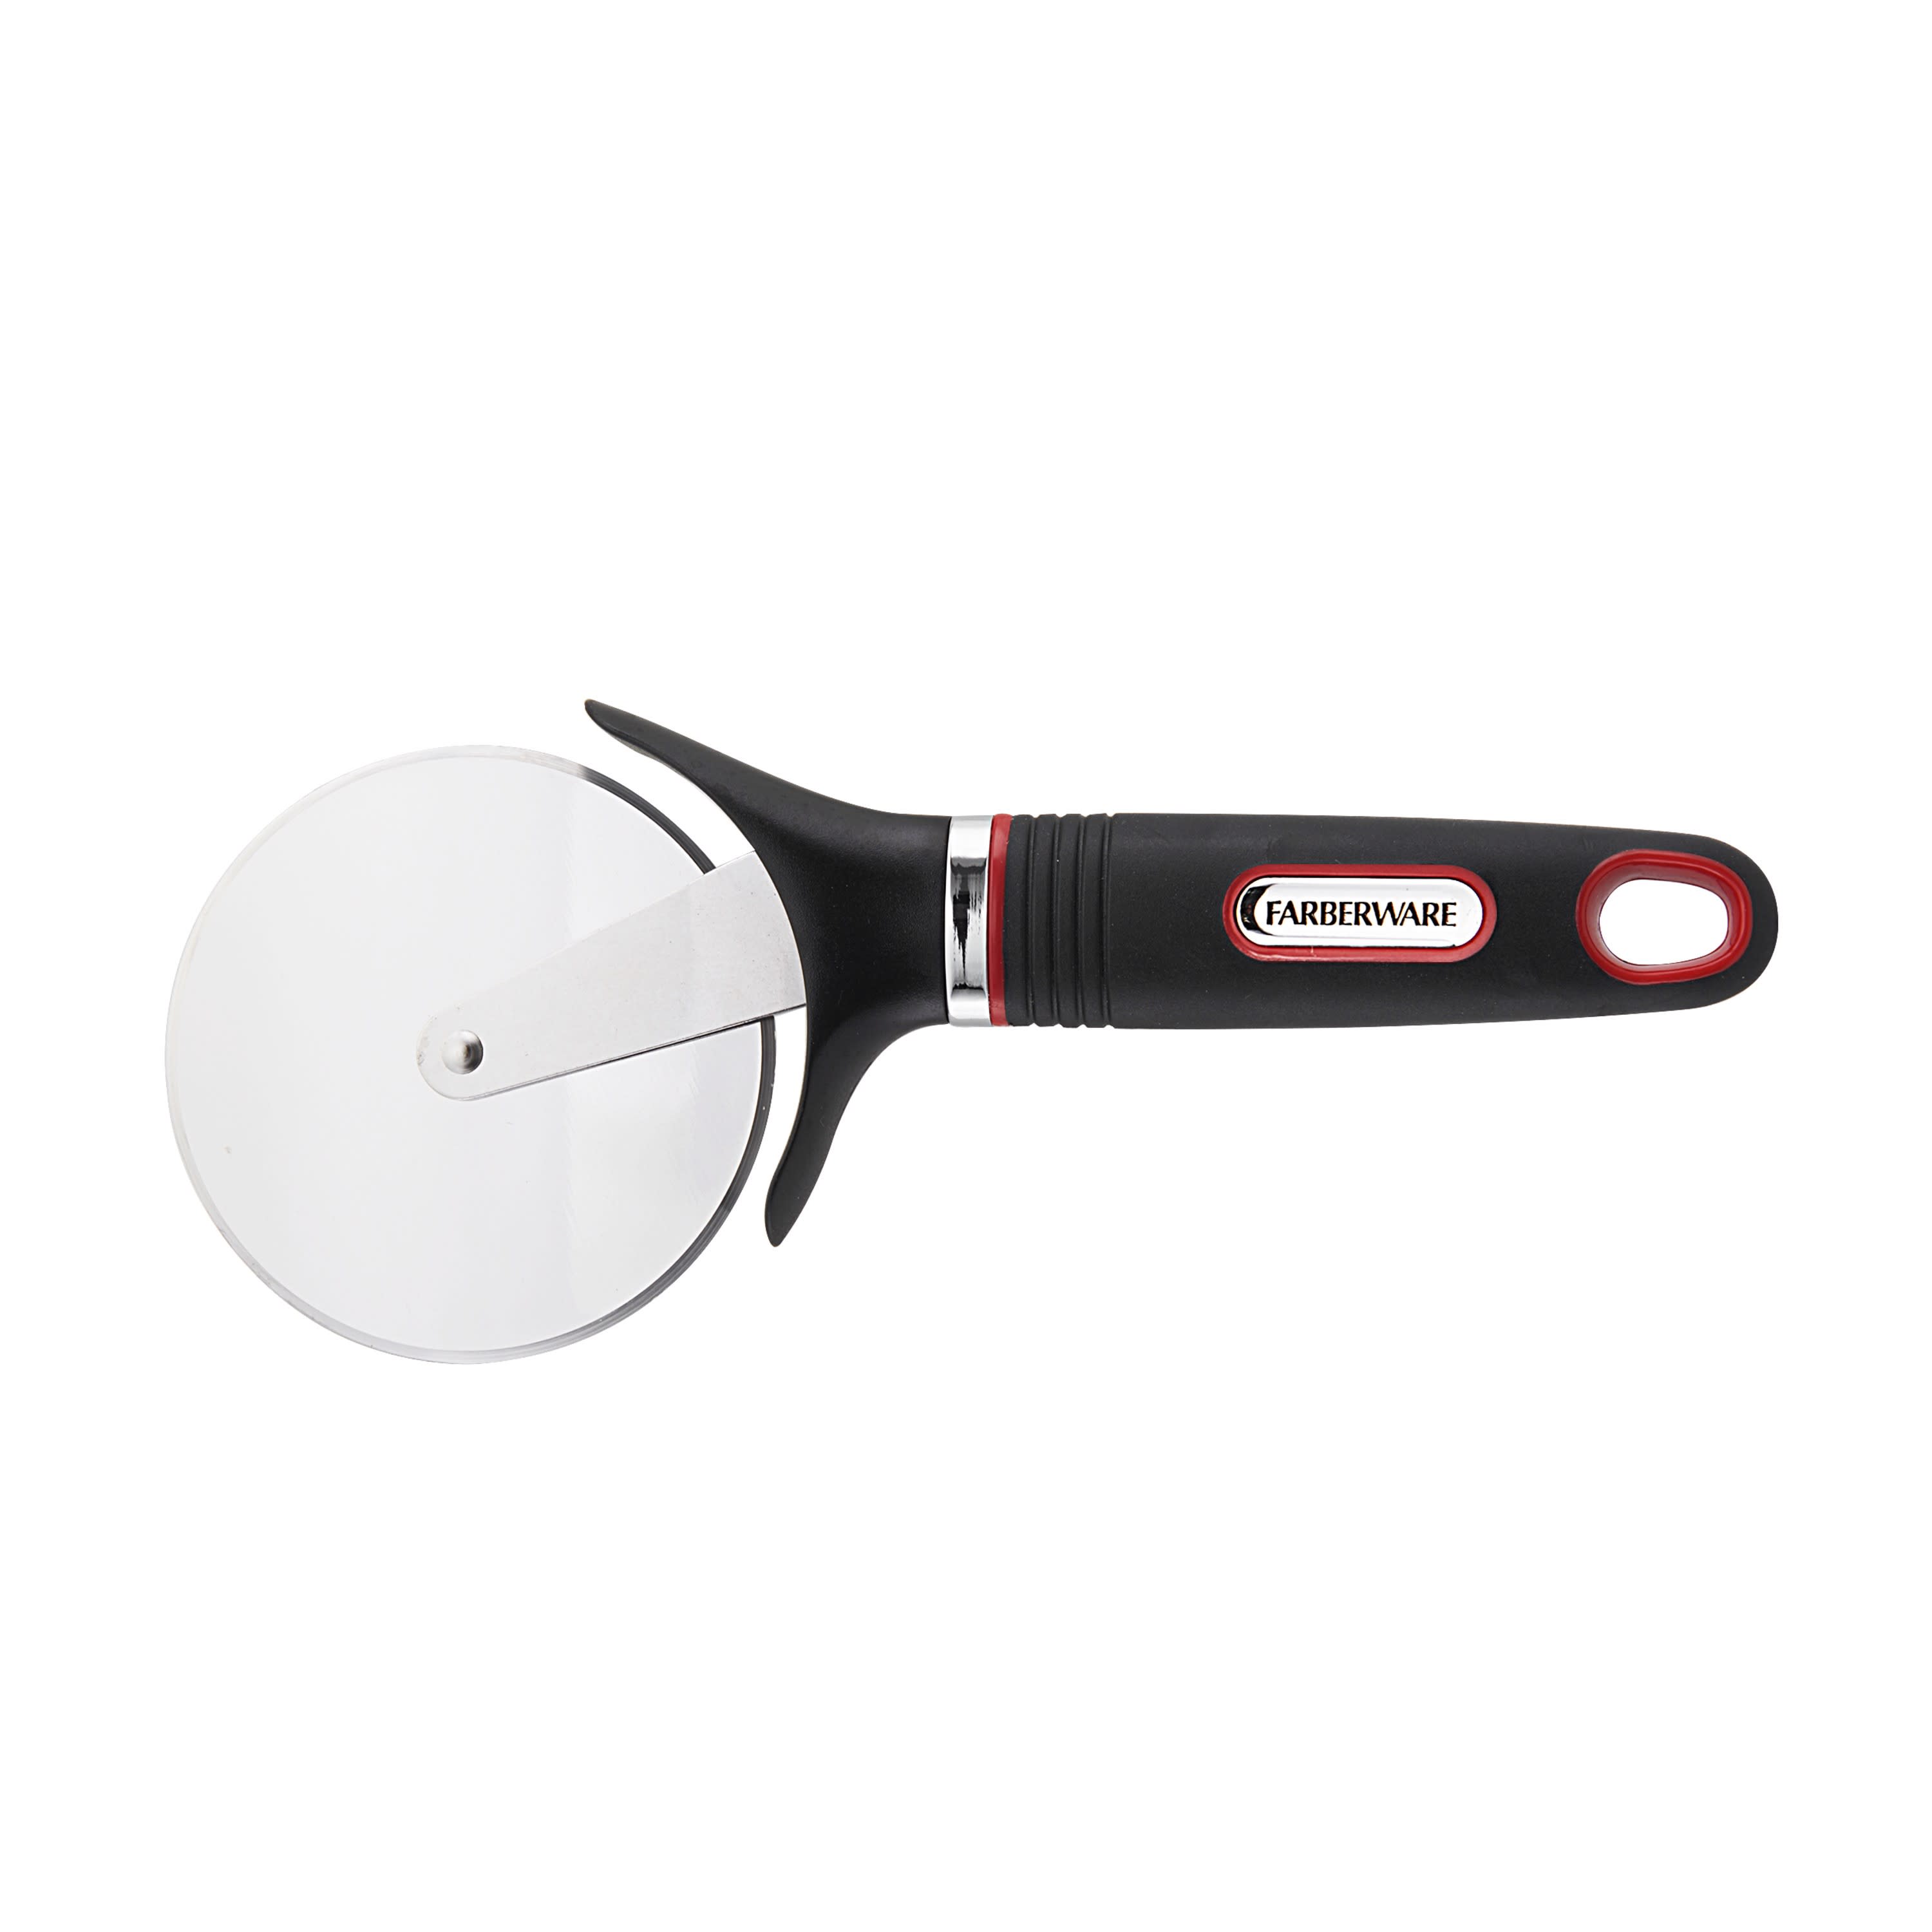 Farberware Soft Grips Pizza Cutter with Red and Black Handle - image 4 of 8